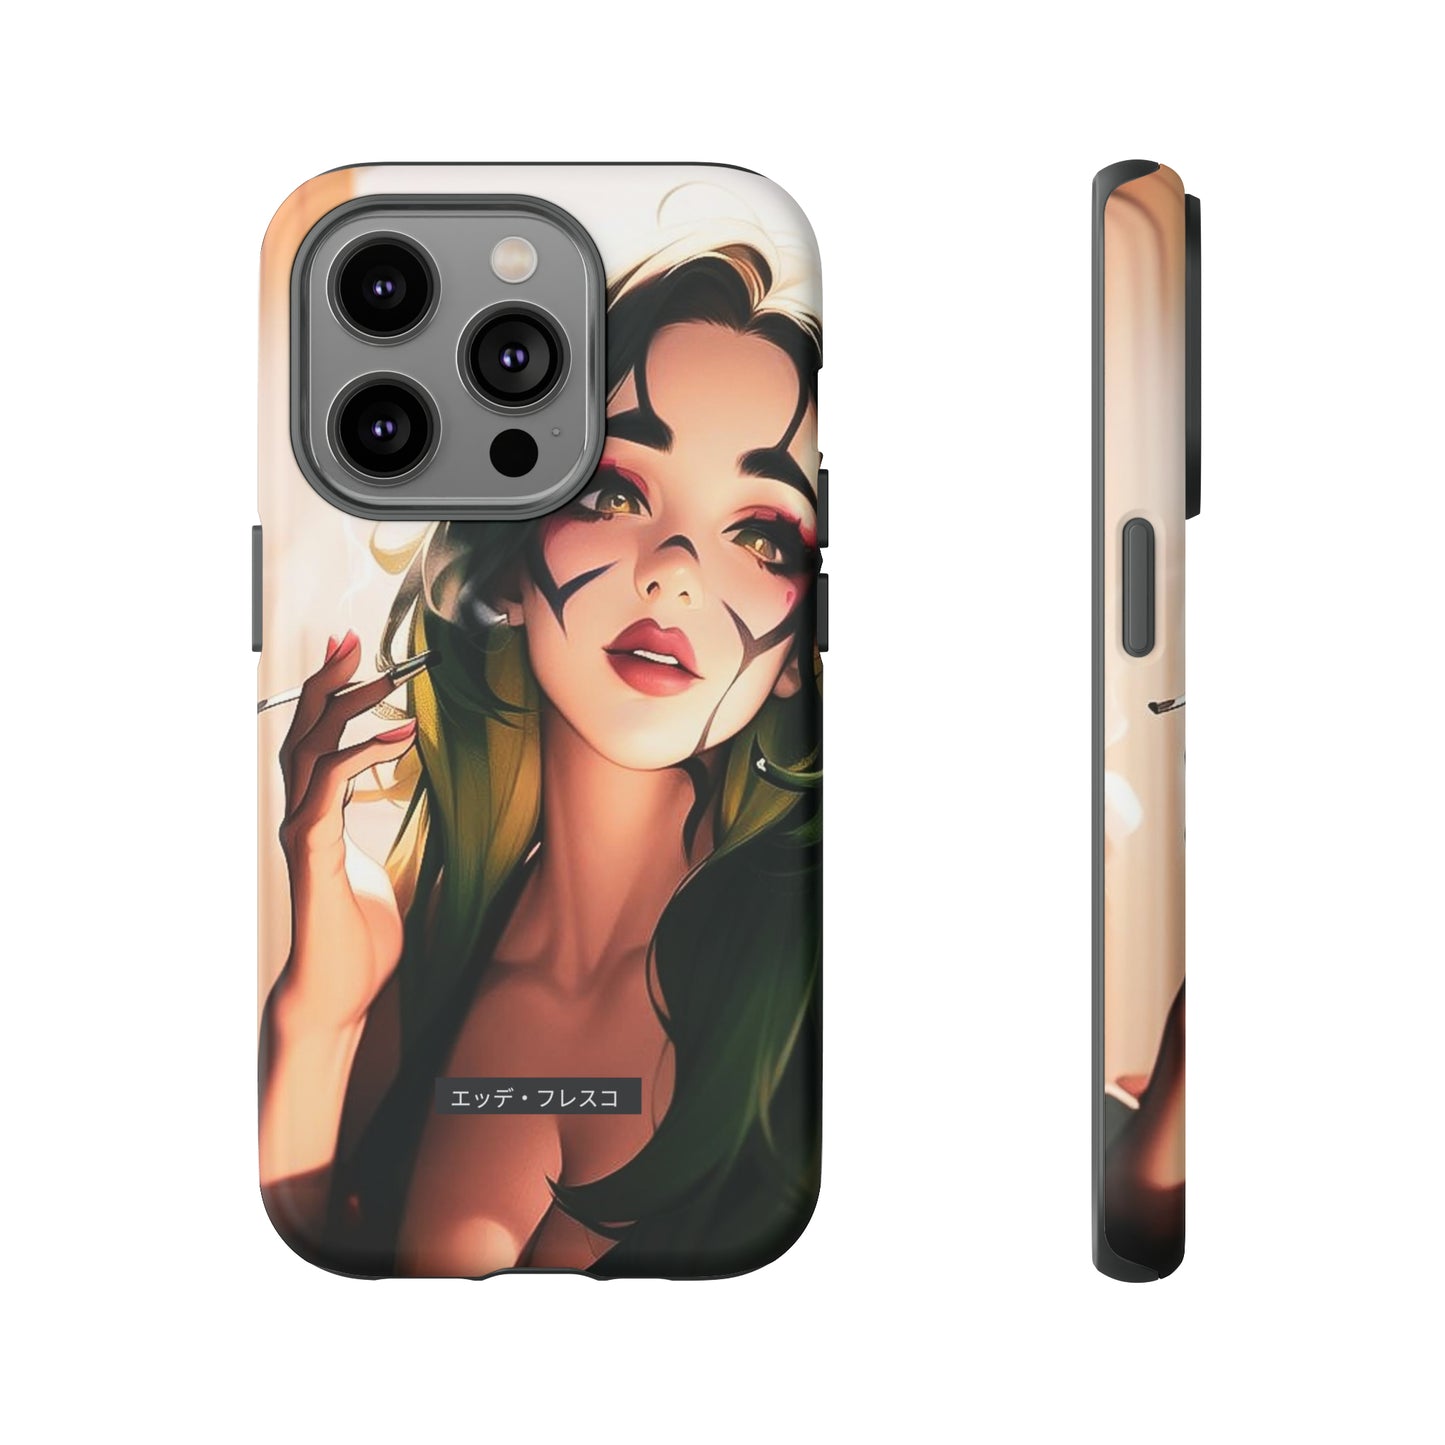 Anime Style Art Tough Cases- "My Wife is Always Smiling 2"